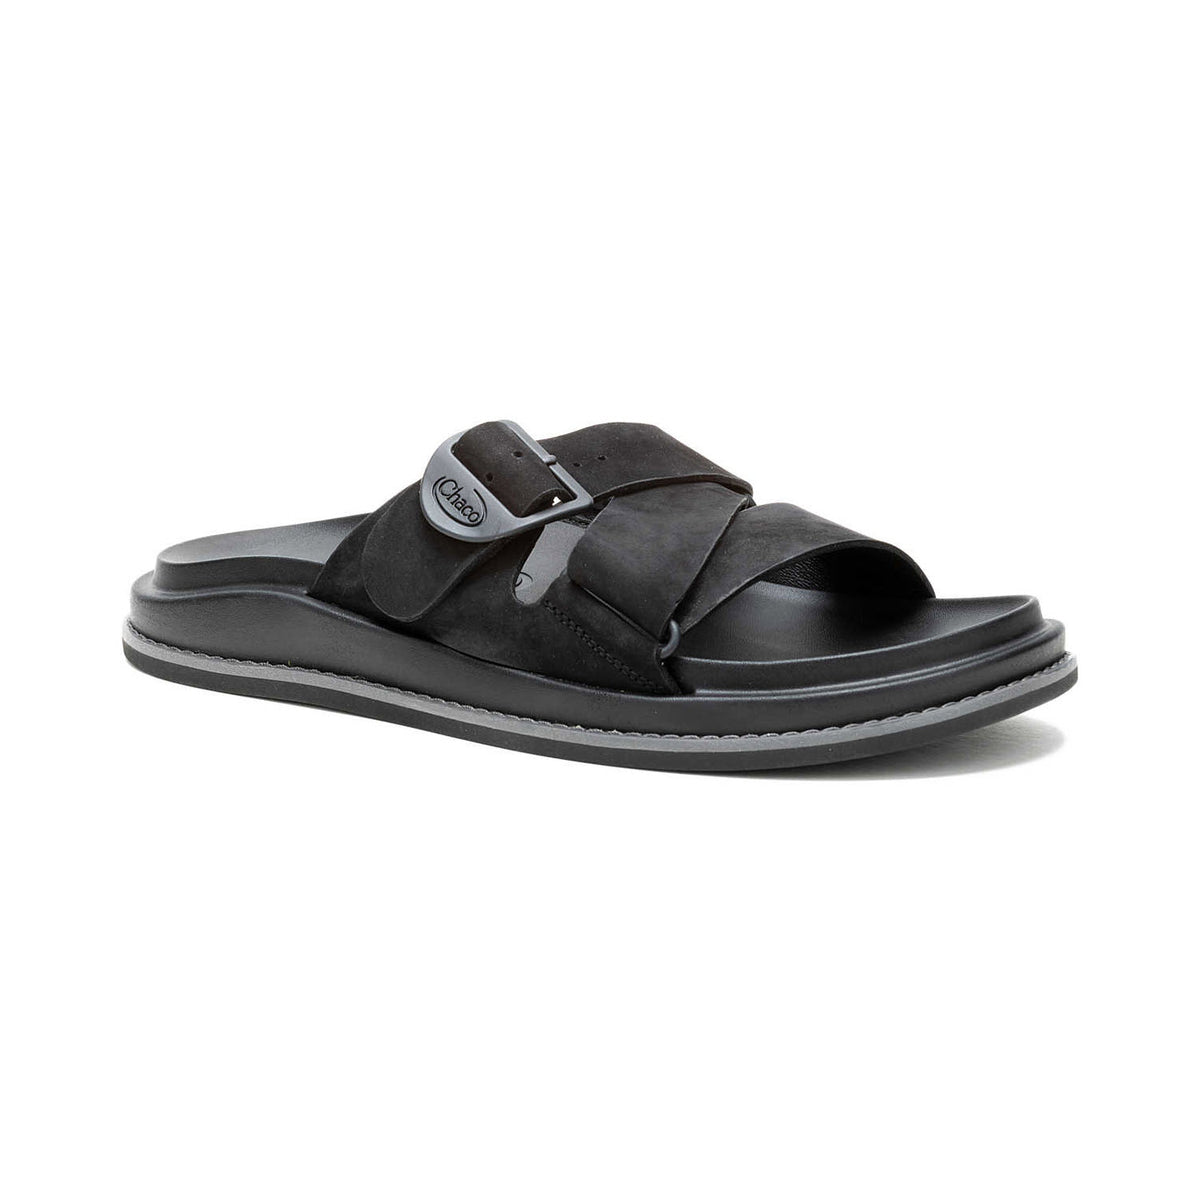 Black leather Chaco Townes Slide sandal with a crisscross design and a round logo on the strap, displayed against a white background.